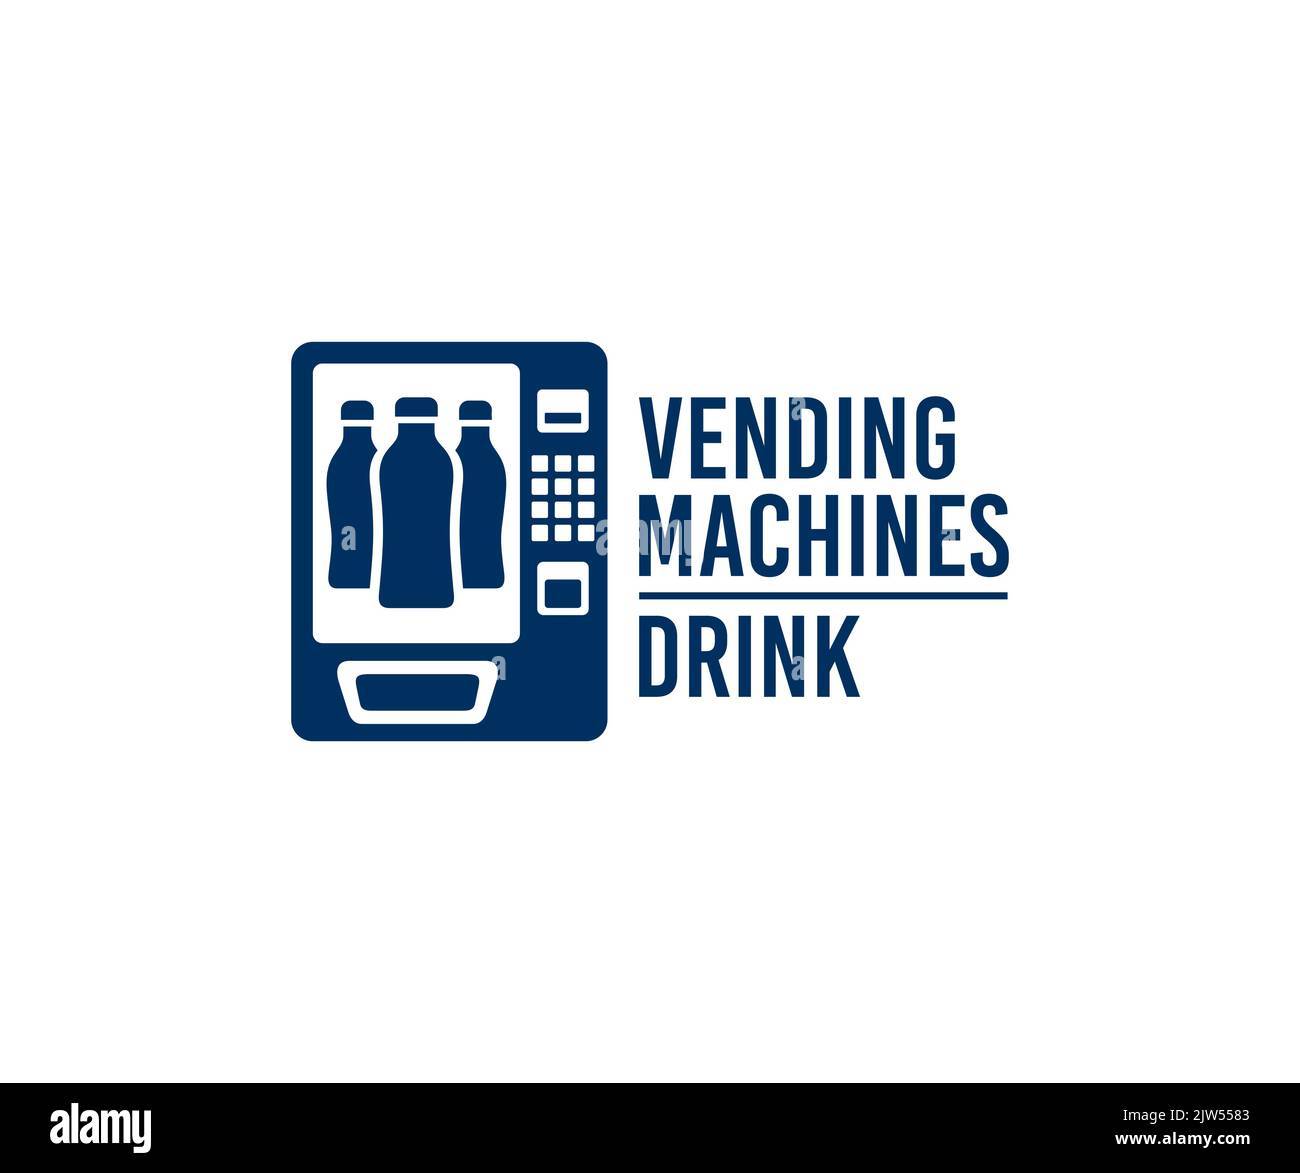 Vending machines on sale of drinks, bottled beverage and juice, logo design. Buying drinks and soda, automatic selling or sell, consumption Stock Vector